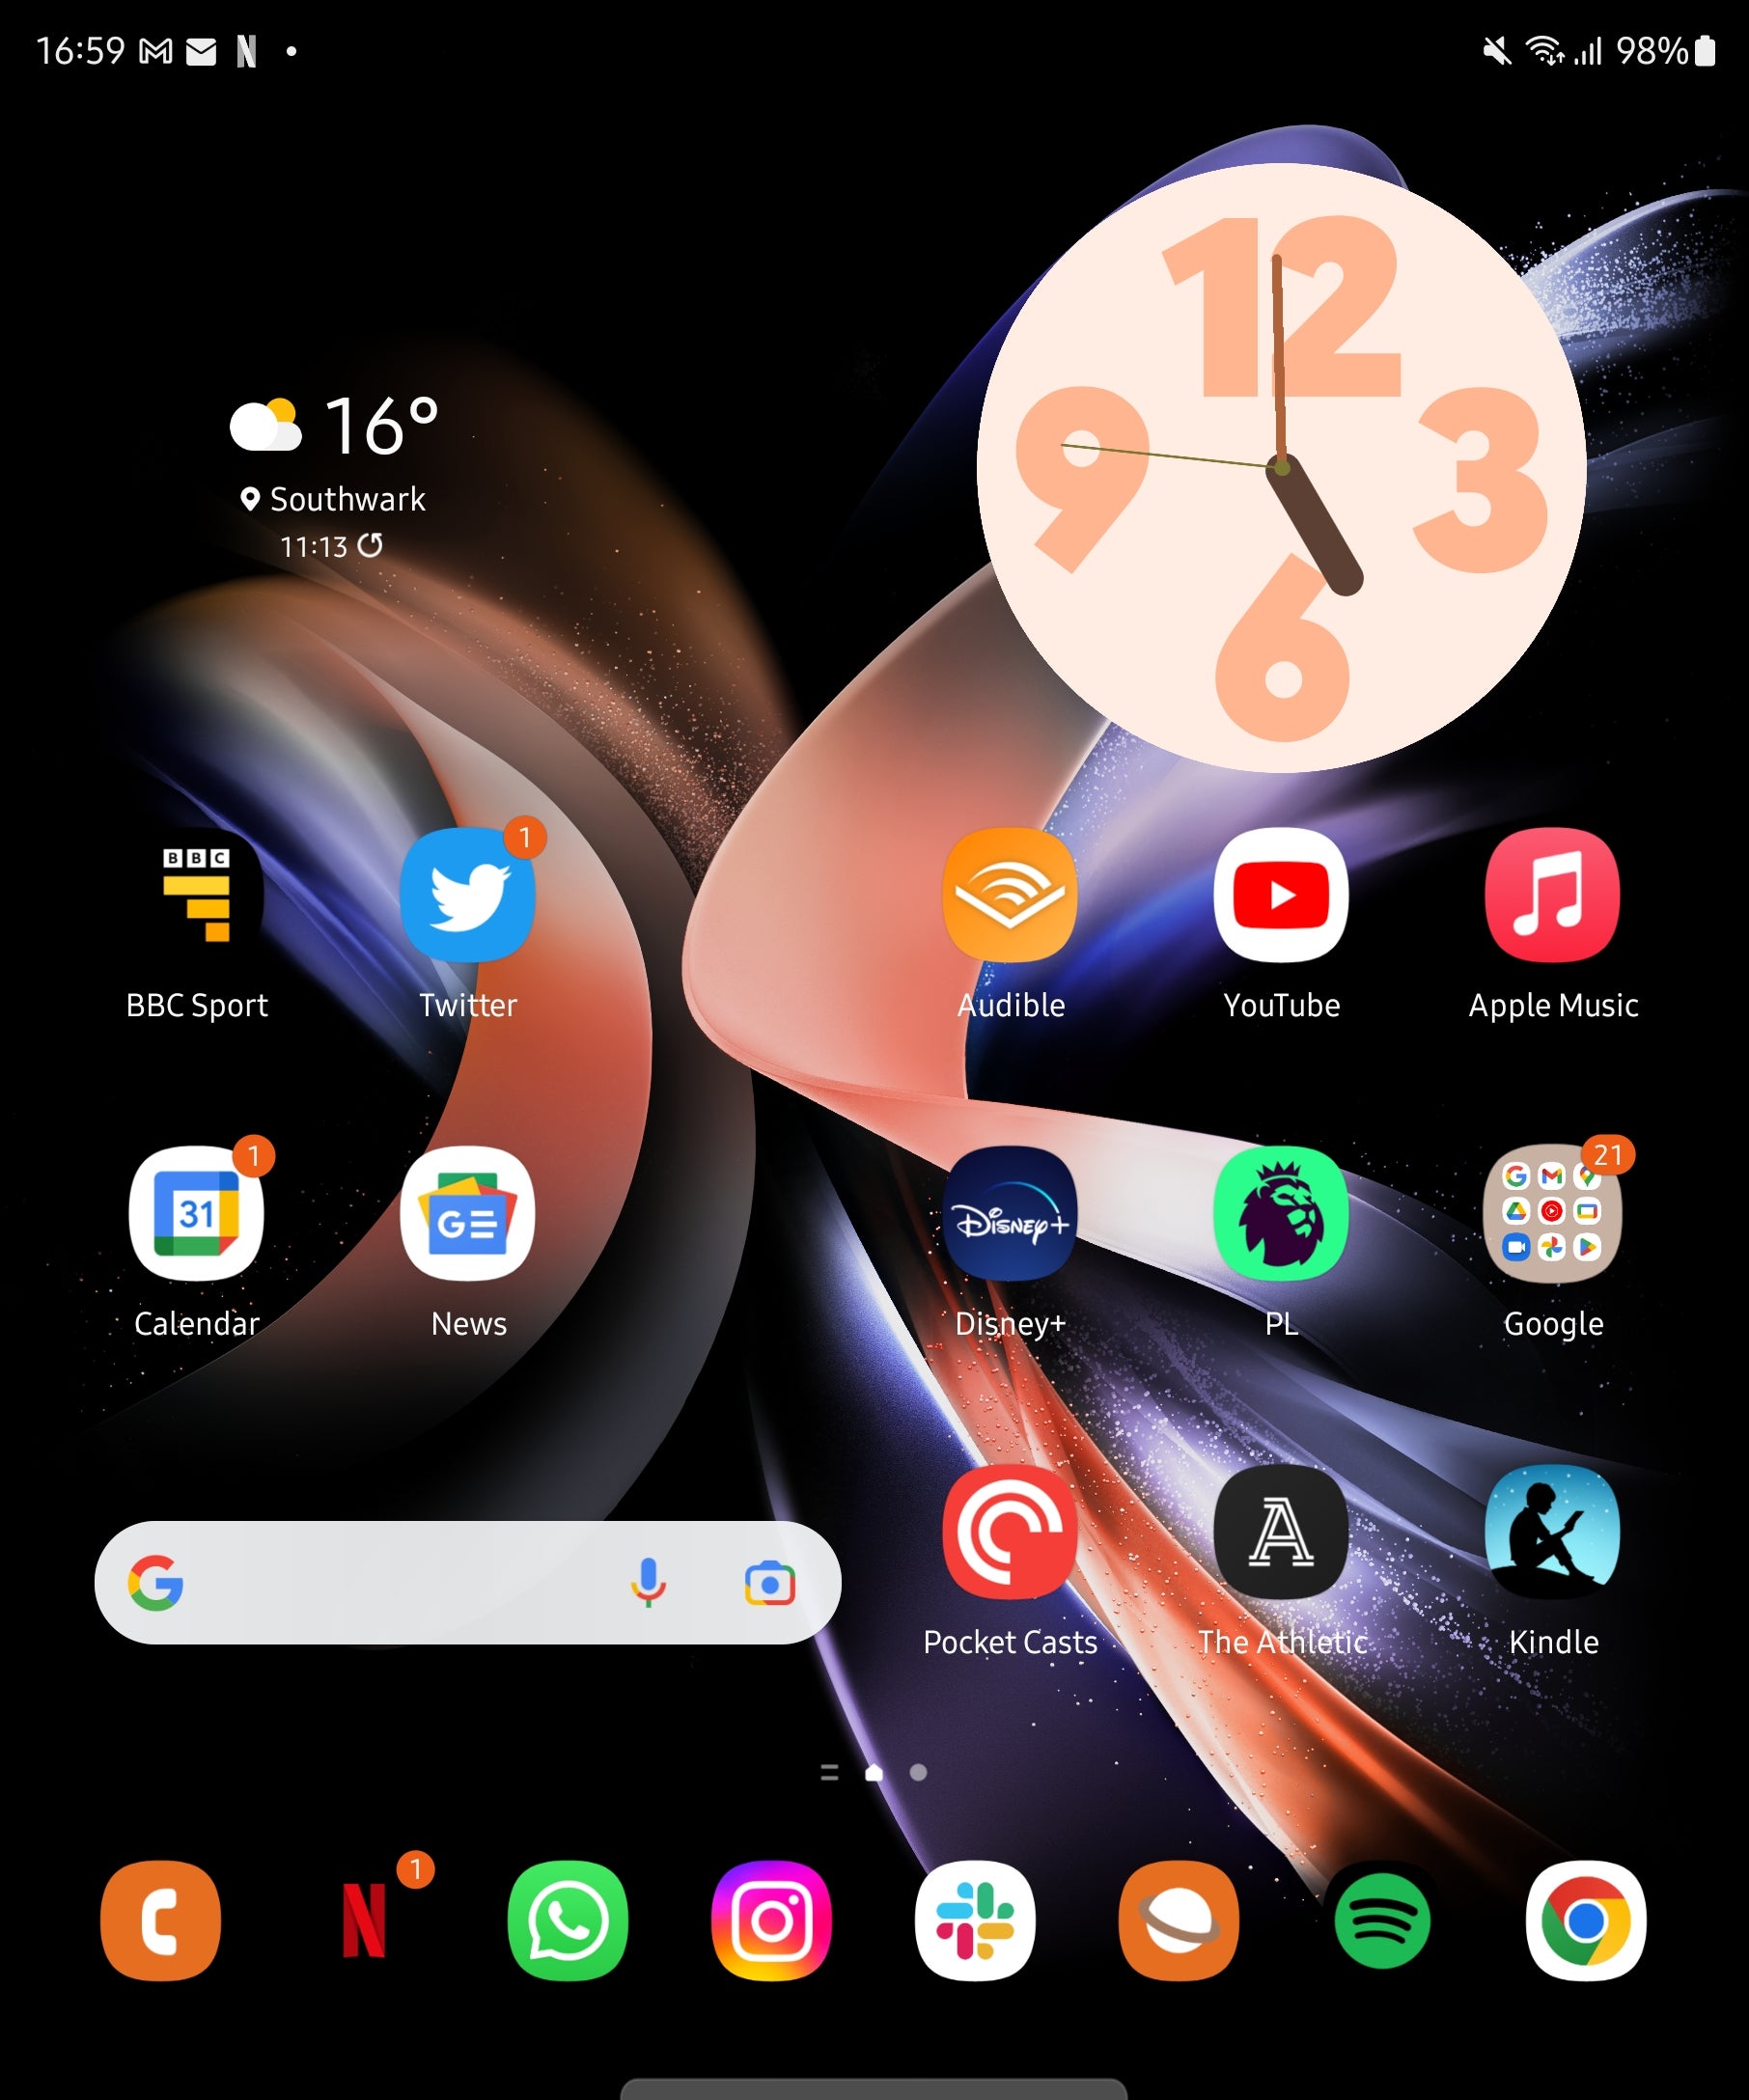 Go to the home screen